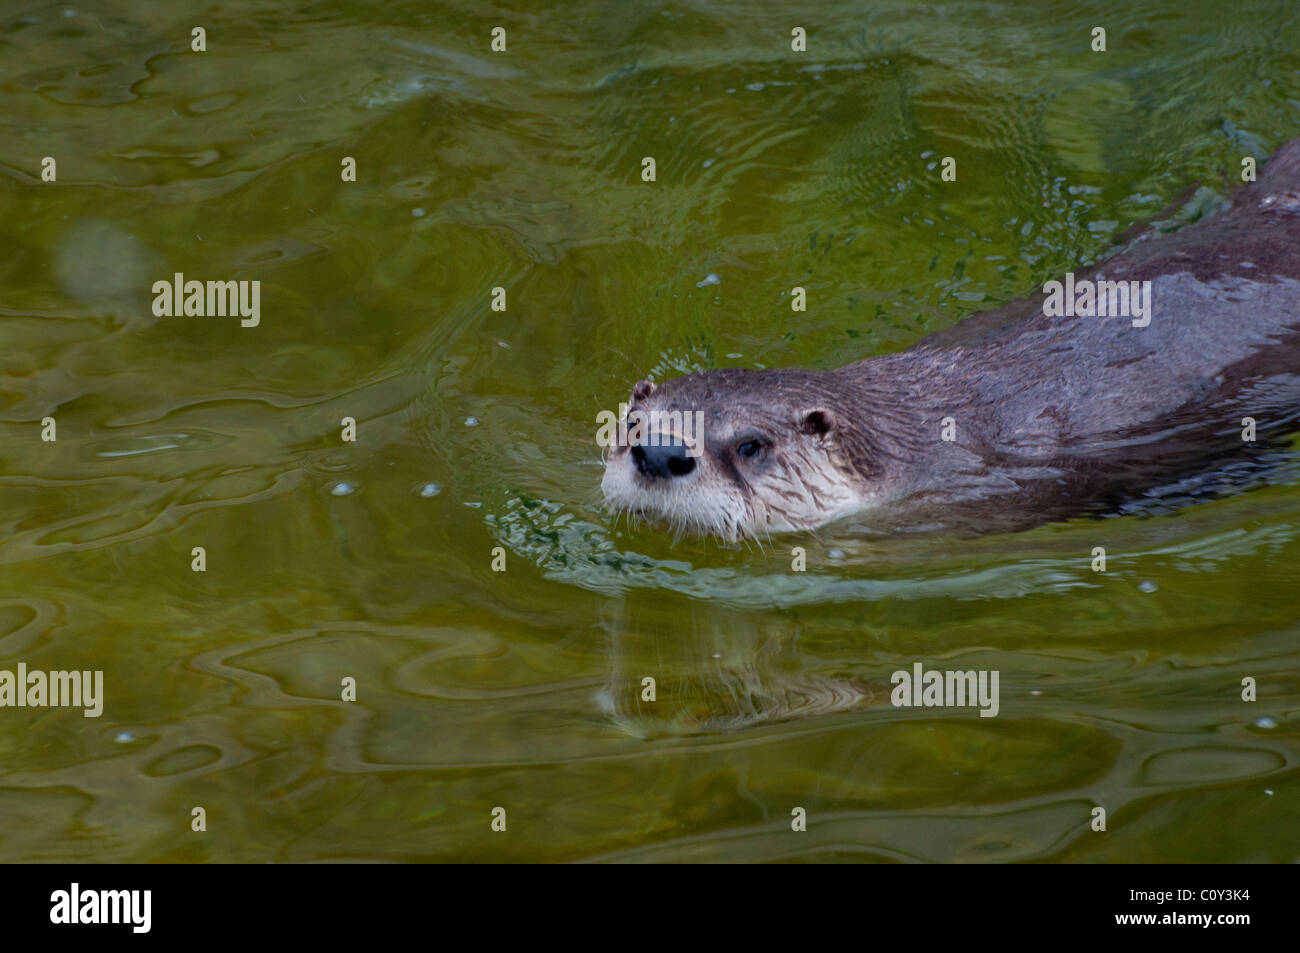 A swimming Northern River Otter Stock Photo